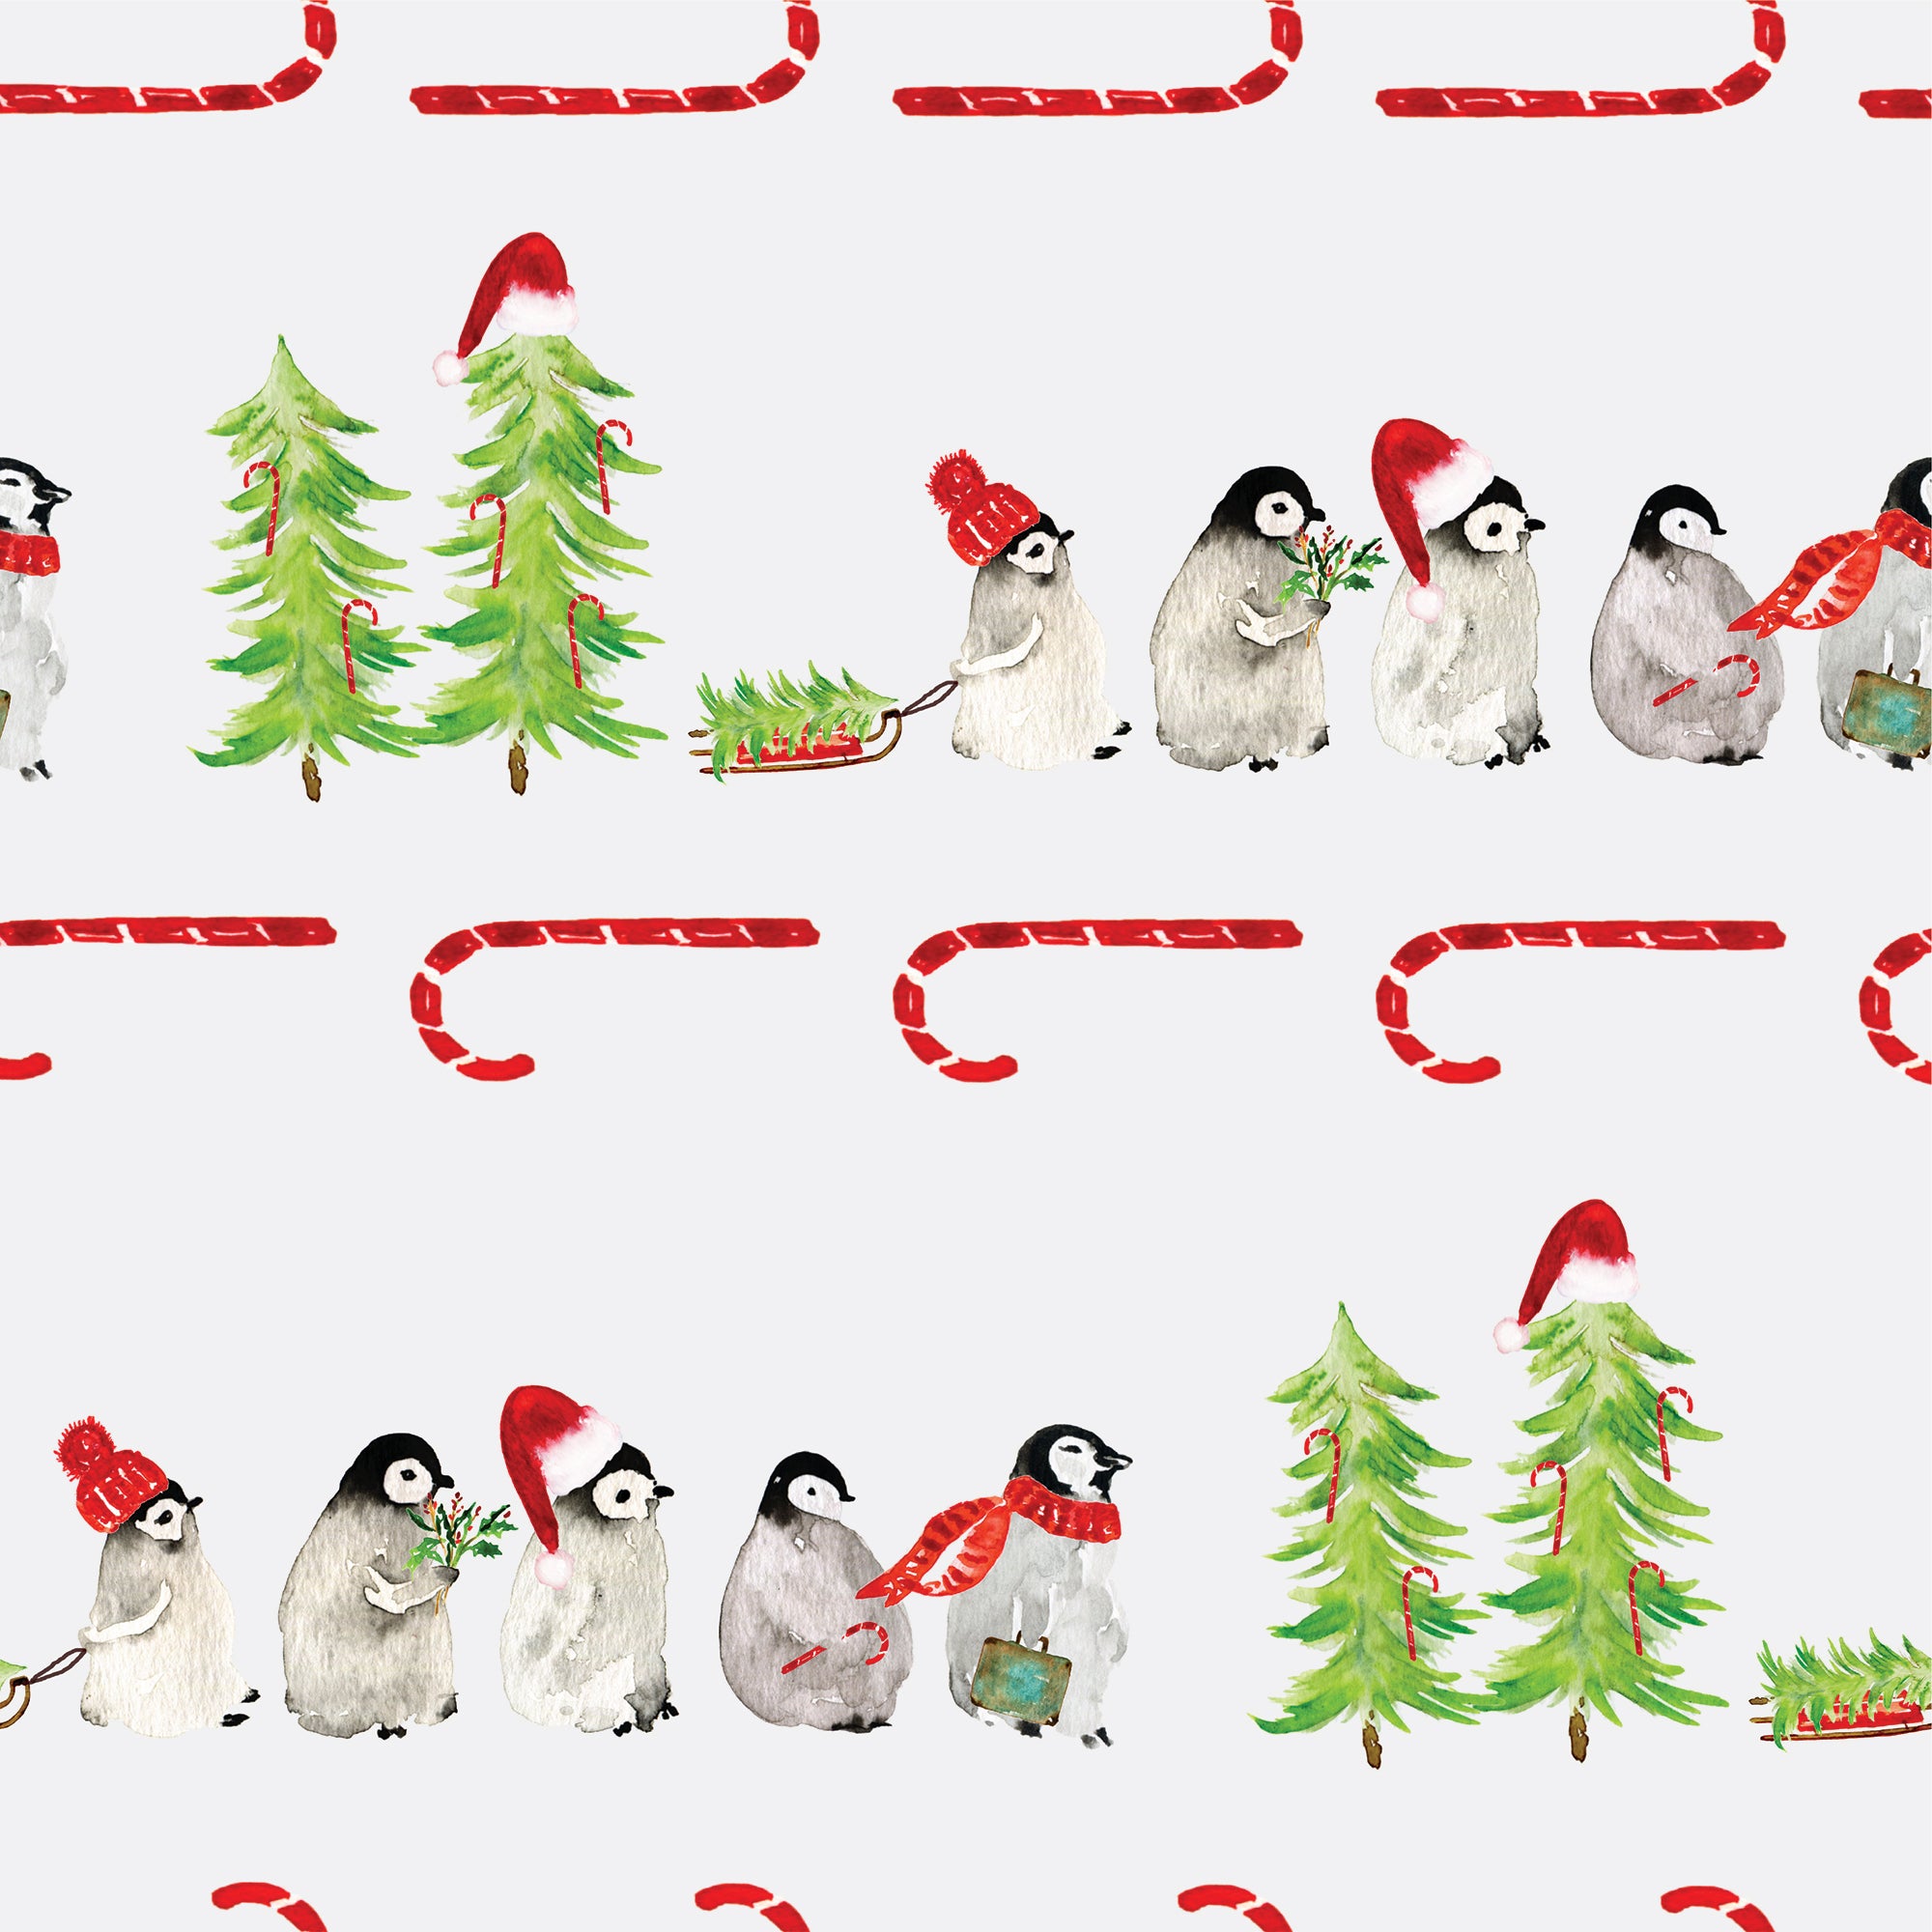 Penguins with red hats besides Christmas trees and candy canes